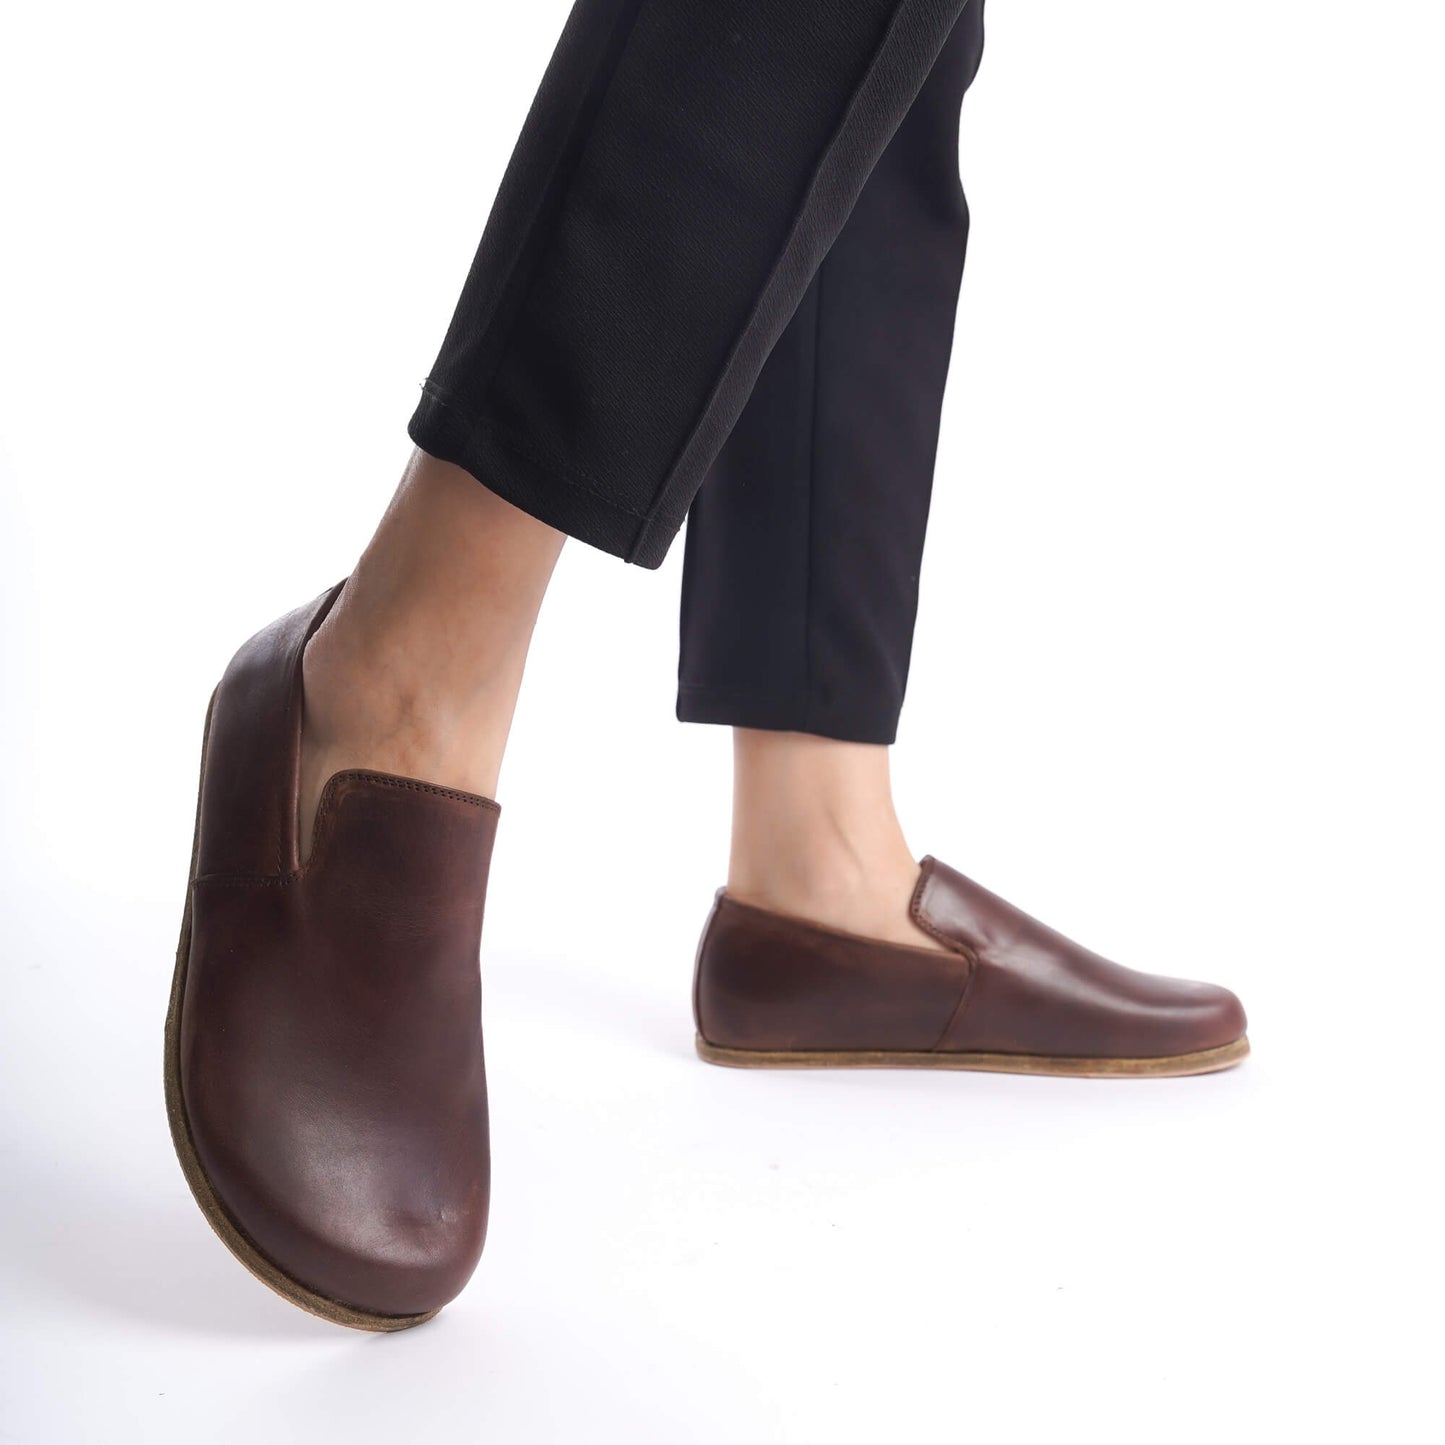 Model wearing black pants and Aeolia Brown Women Loafers, showcasing the shoe's elegant design and comfortable fit in motion.